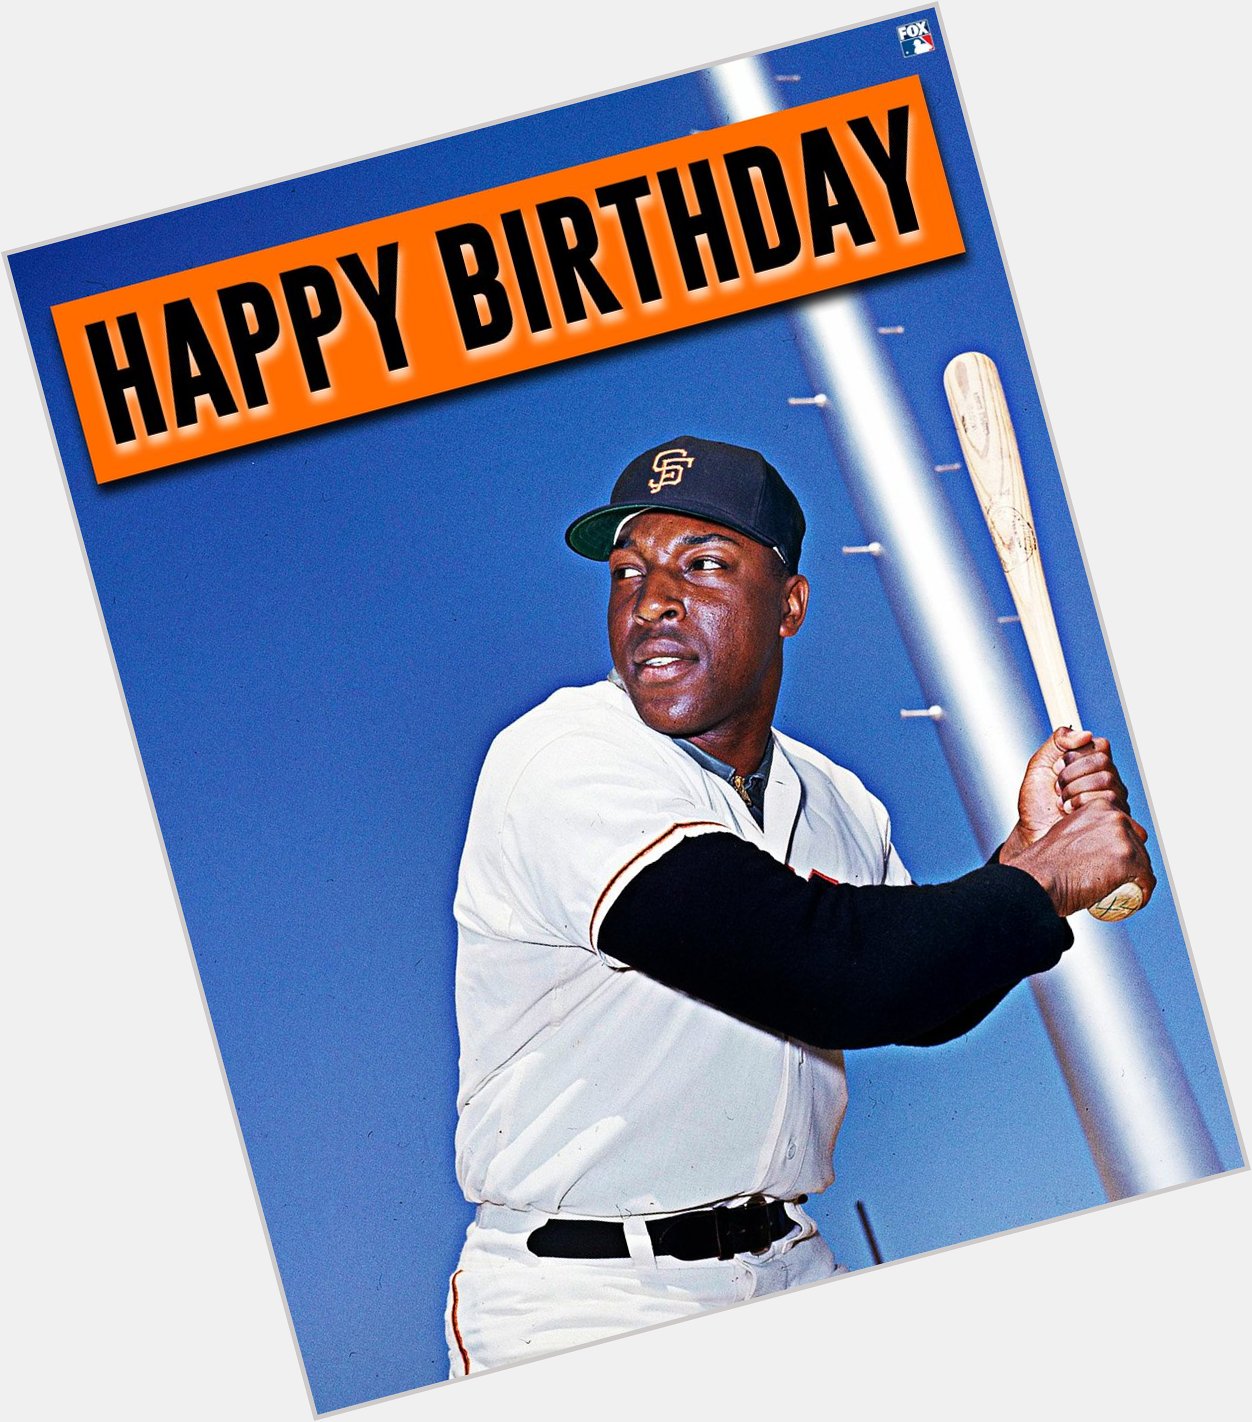 Happy 80th Birthday to the legendary Willie McCovey! 